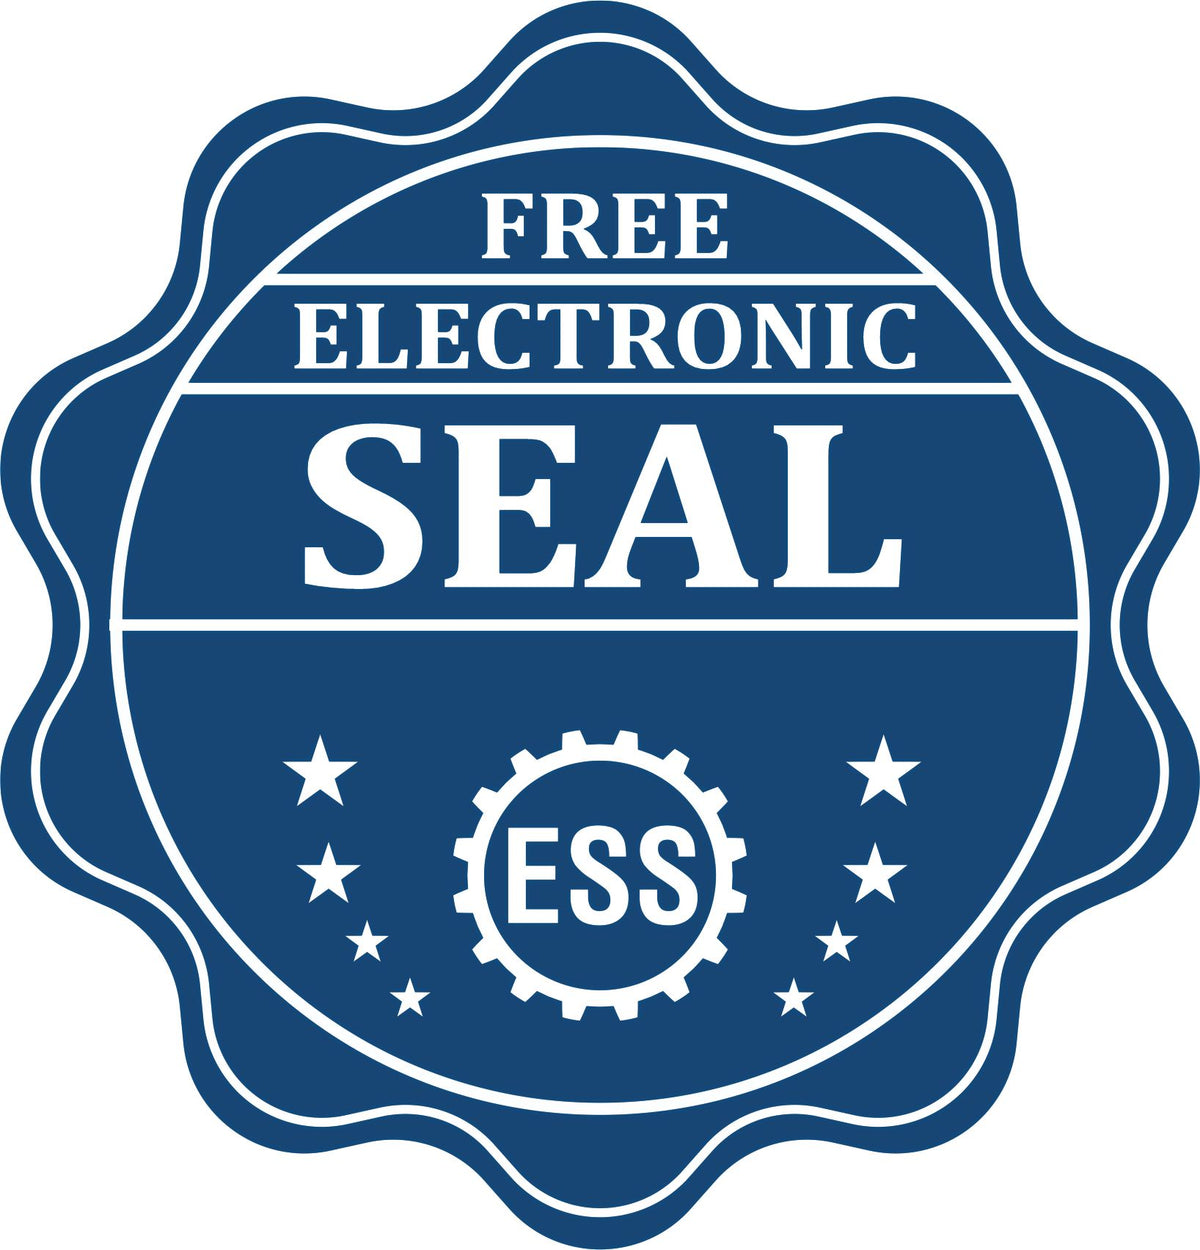 A badge showing a free electronic seal for the Kentucky Desk Architect Embossing Seal with stars and the ESS gear on the emblem.